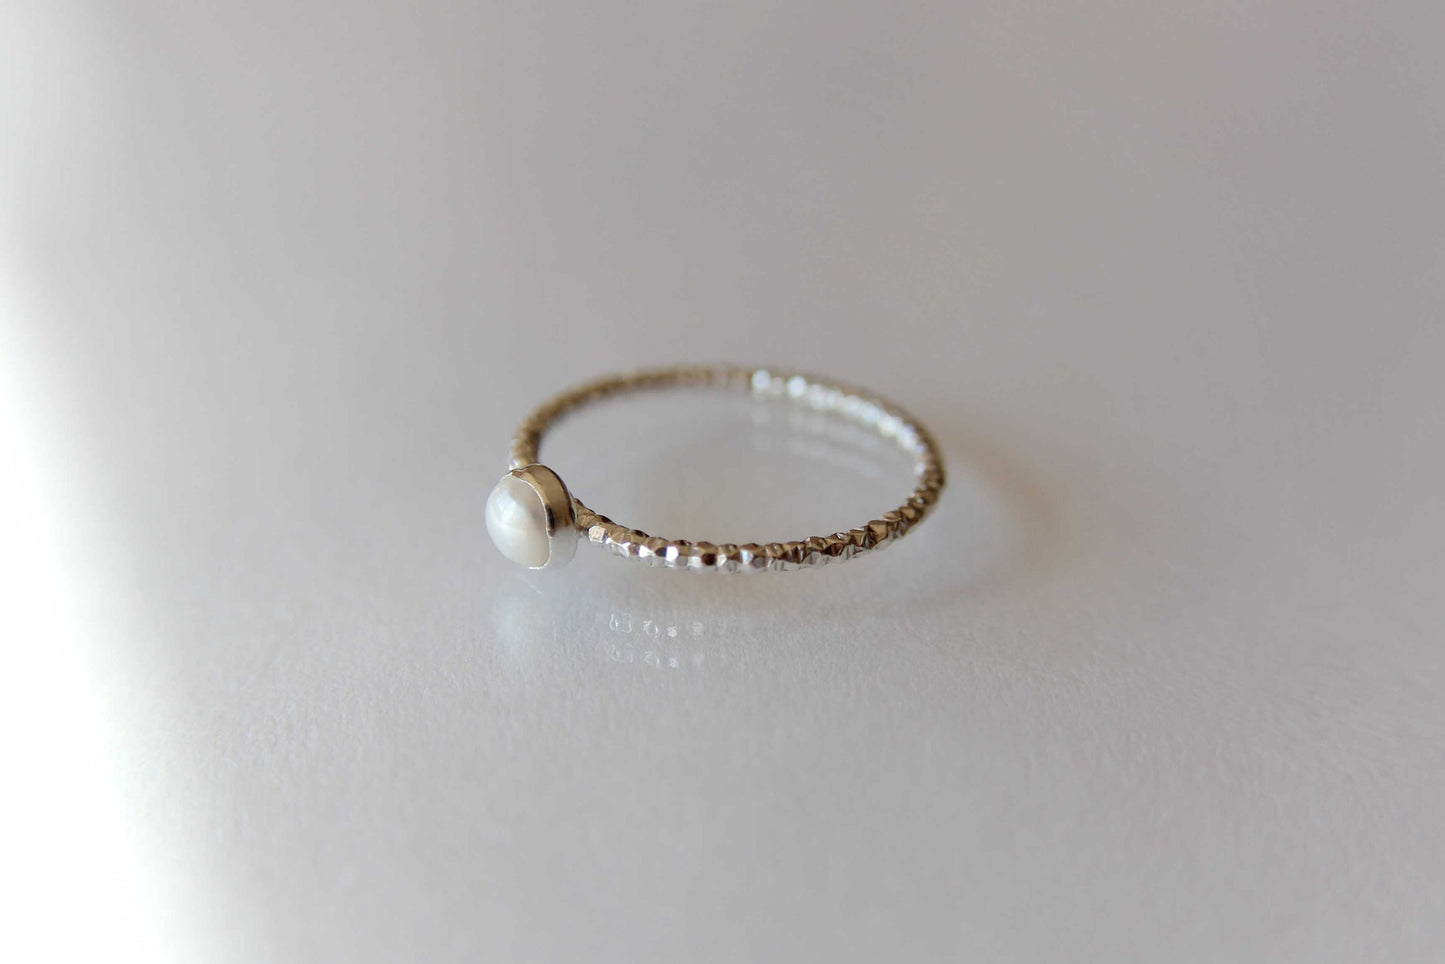 Pearl Ring, White Pearl Ring, Sterling Silver Pearl Ring, Freshwater Pearl Ring, Textured Pearl Ring, June Birthstone, Pearl Jewelry, Gift